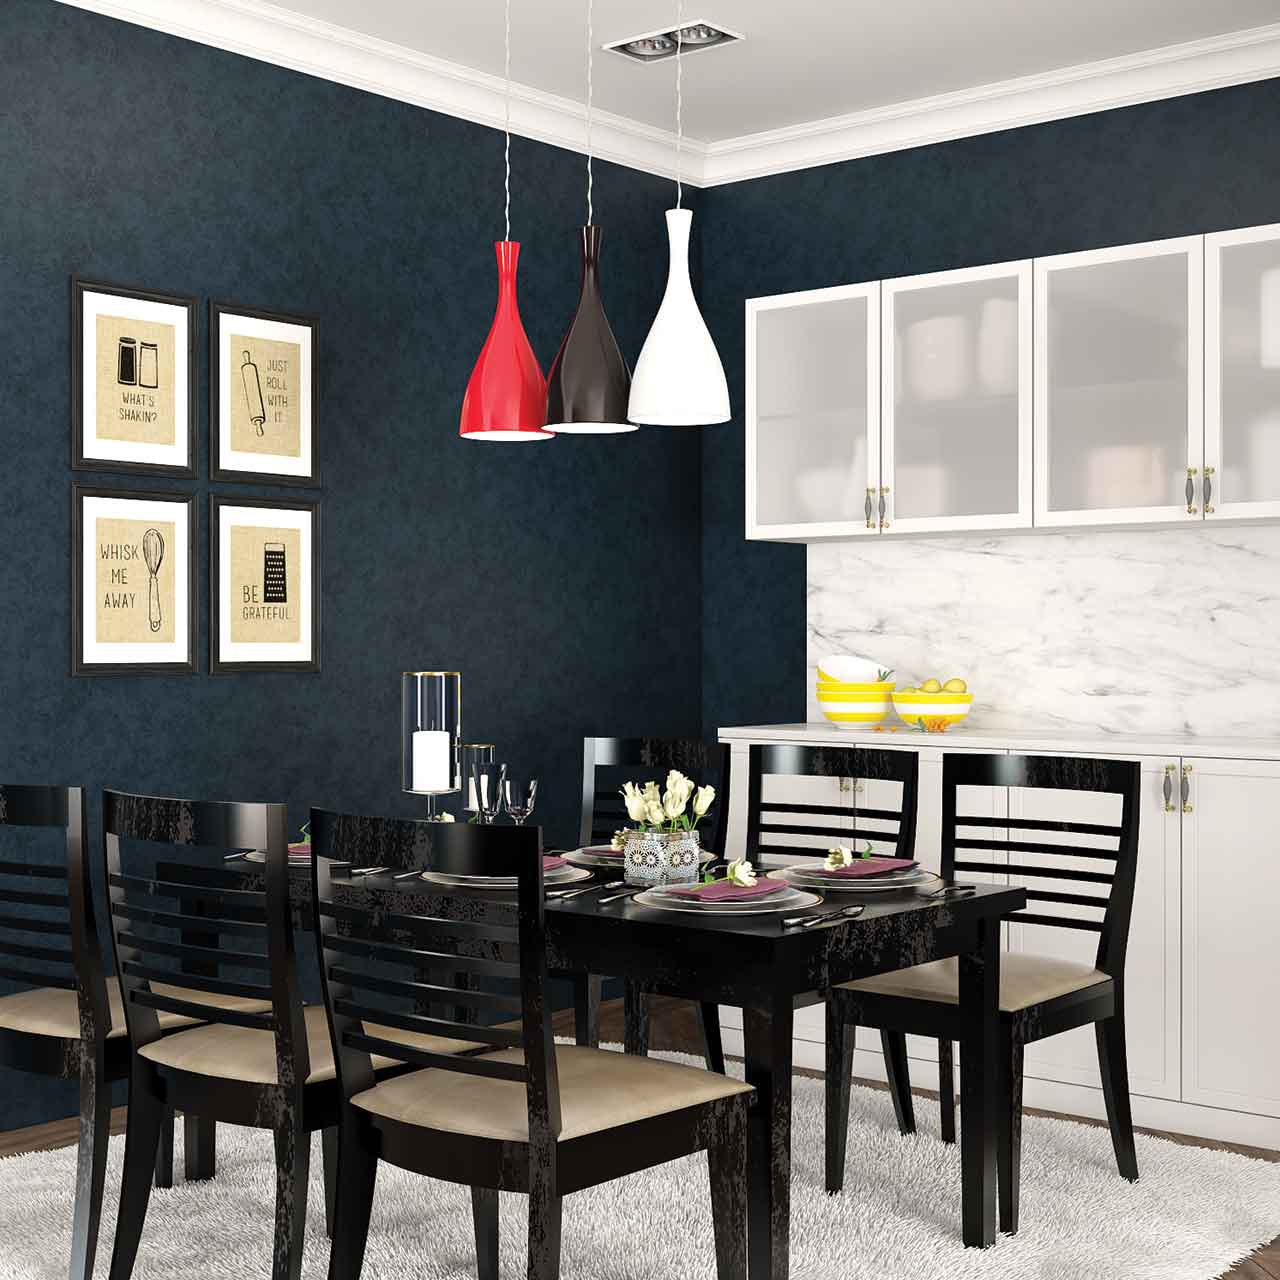 Dining room sets for your home if you want to create an exquisite and sophisticated style with small dining room design